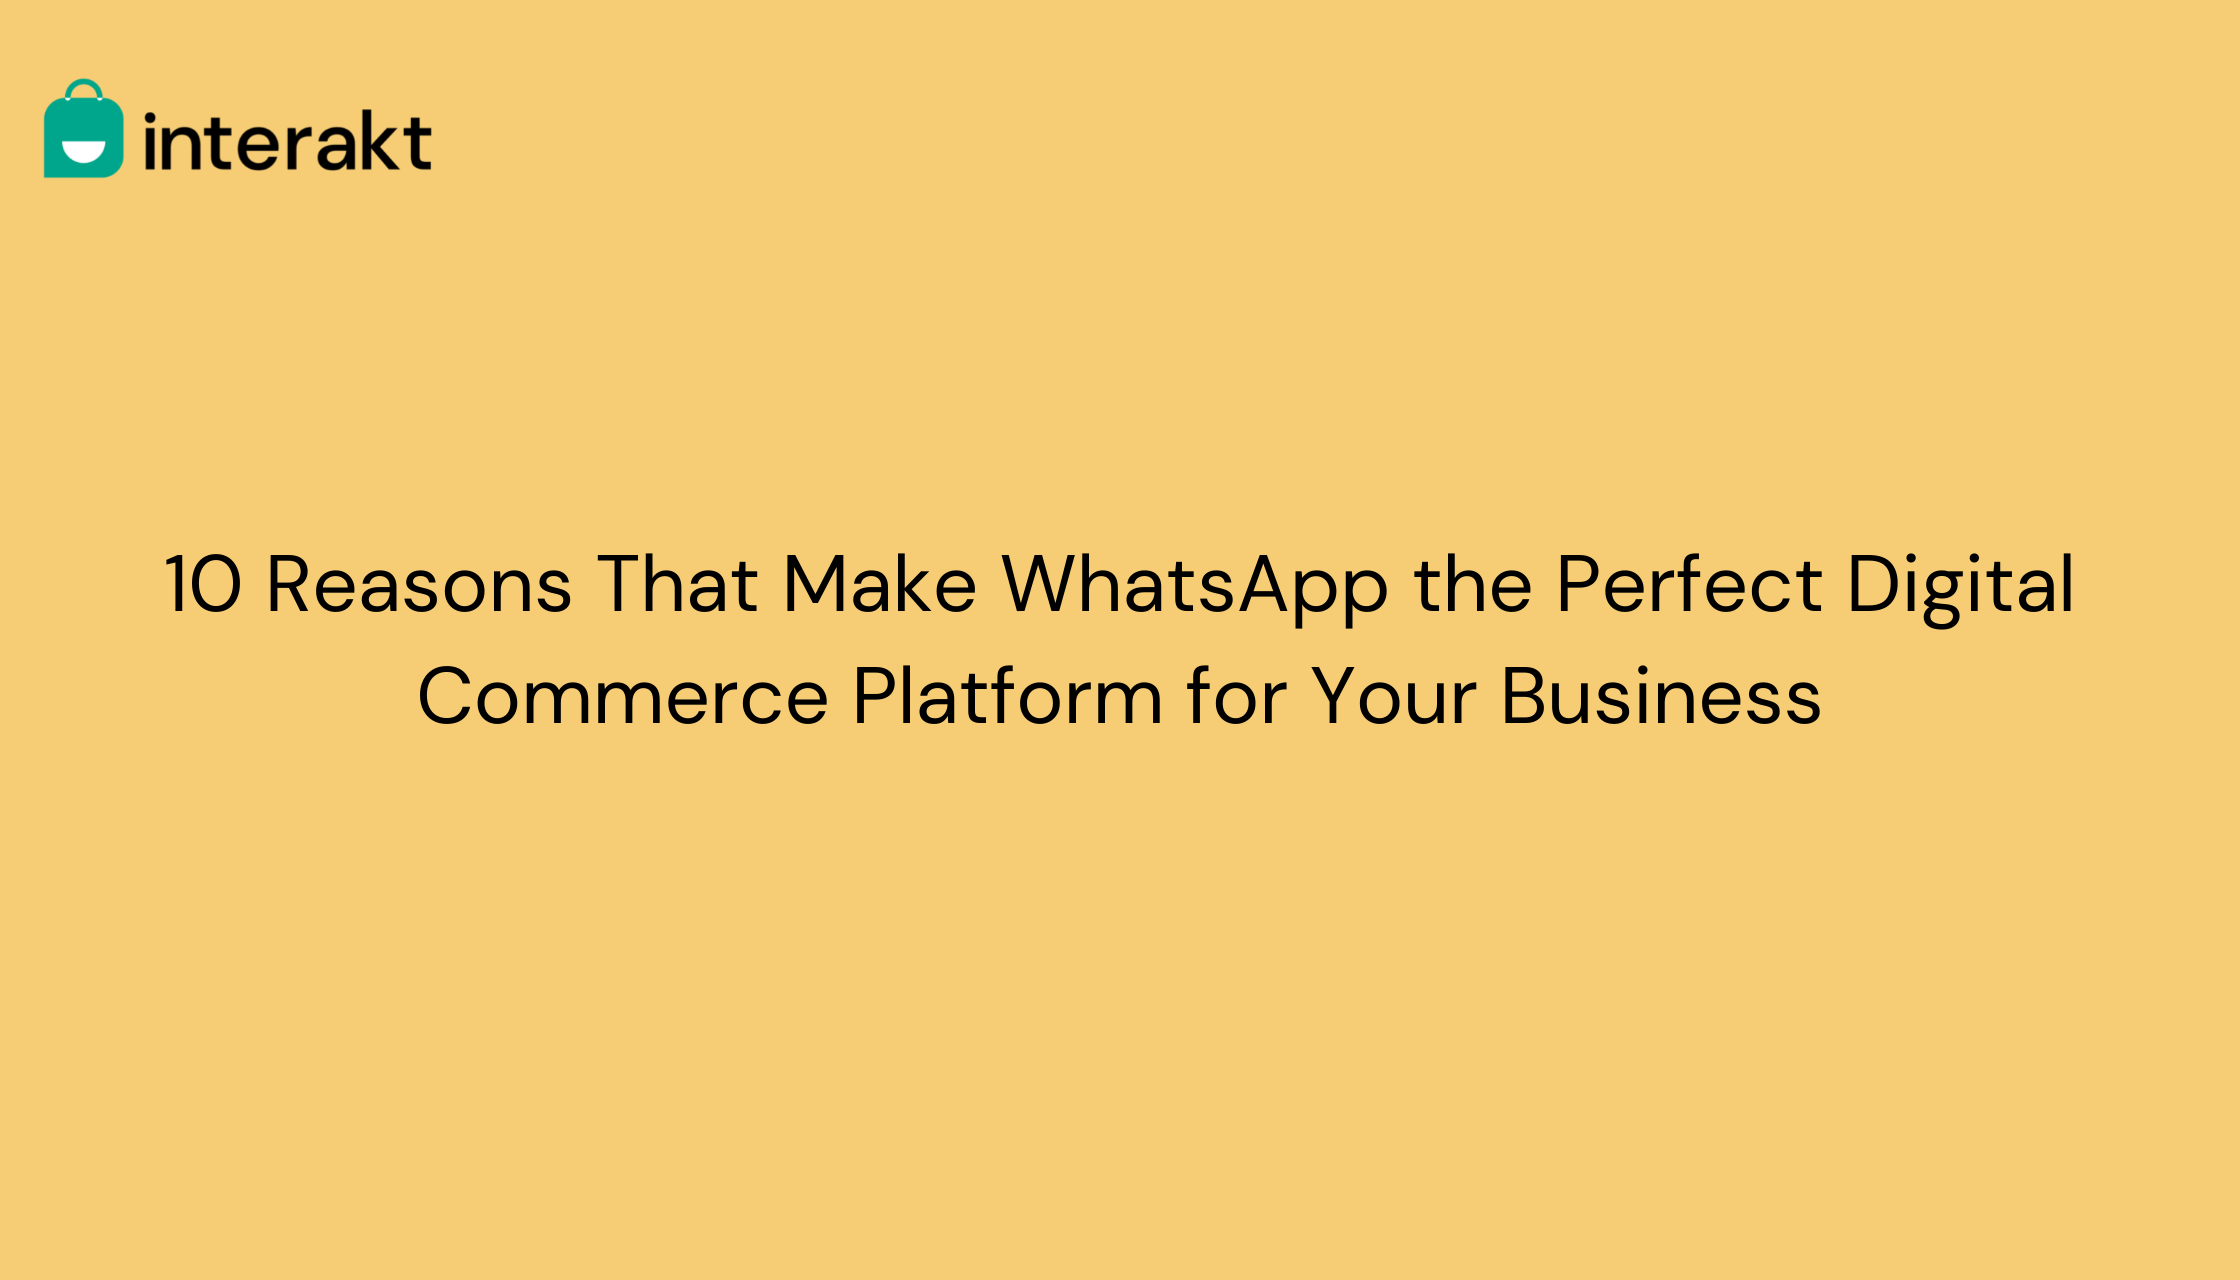 10 Reasons That Make WhatsApp the Perfect Digital Commerce Platform for Your Business